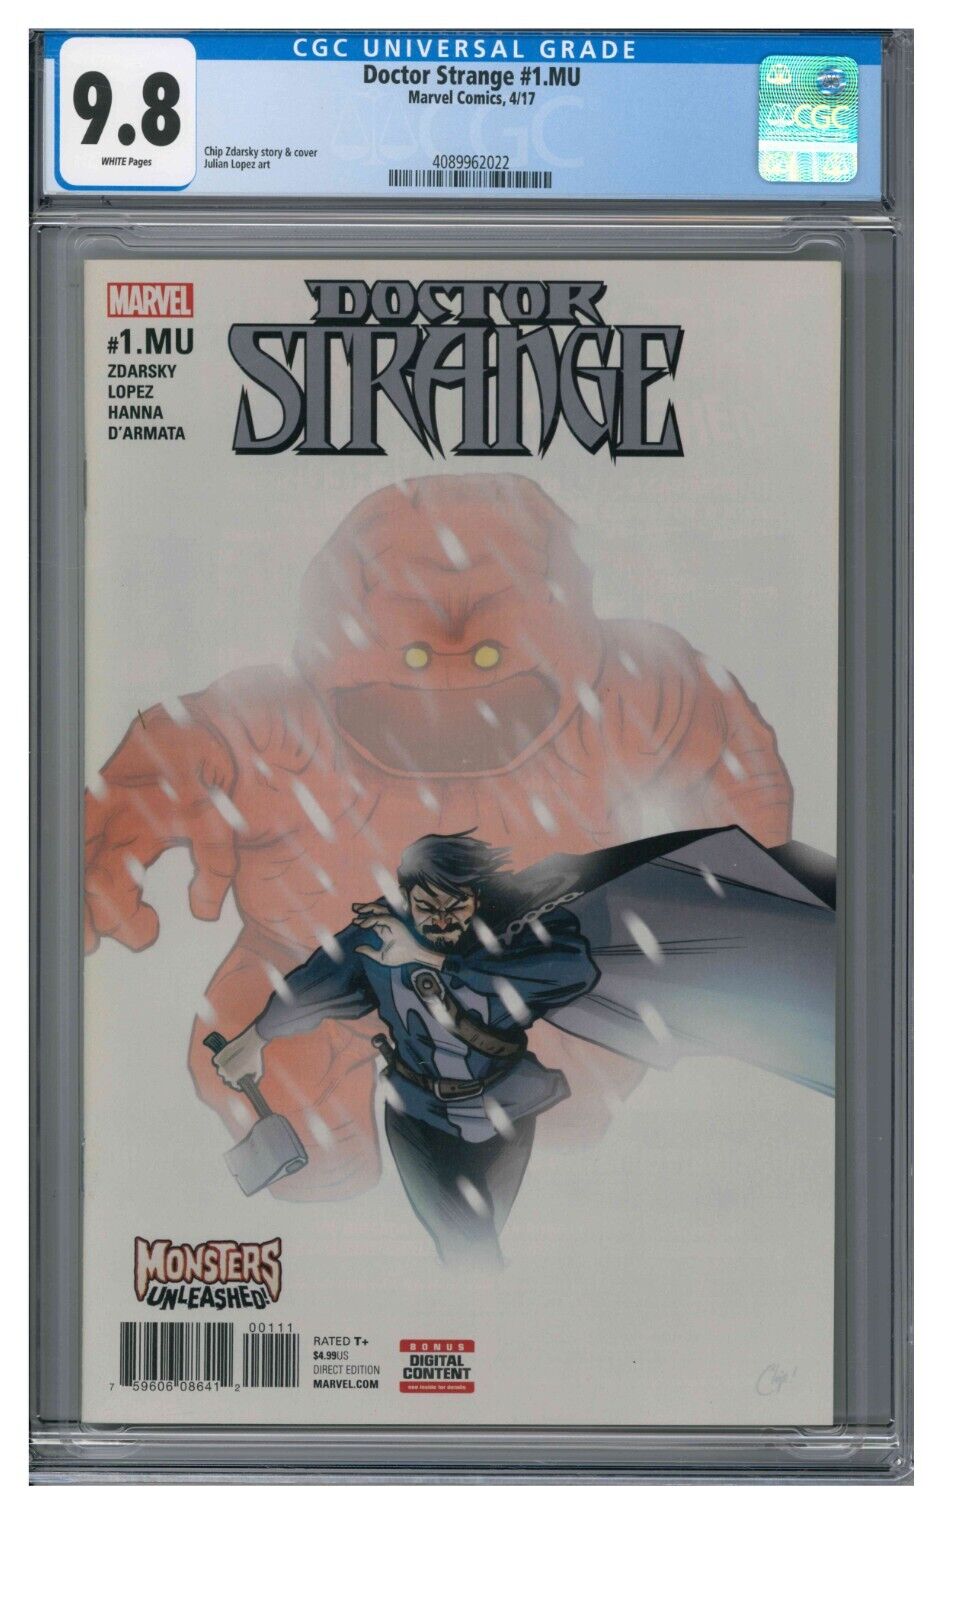 Doctor Strange #1.MU (2017) Marvel Monsters Unleashed CGC 9.8 White Pages PX978